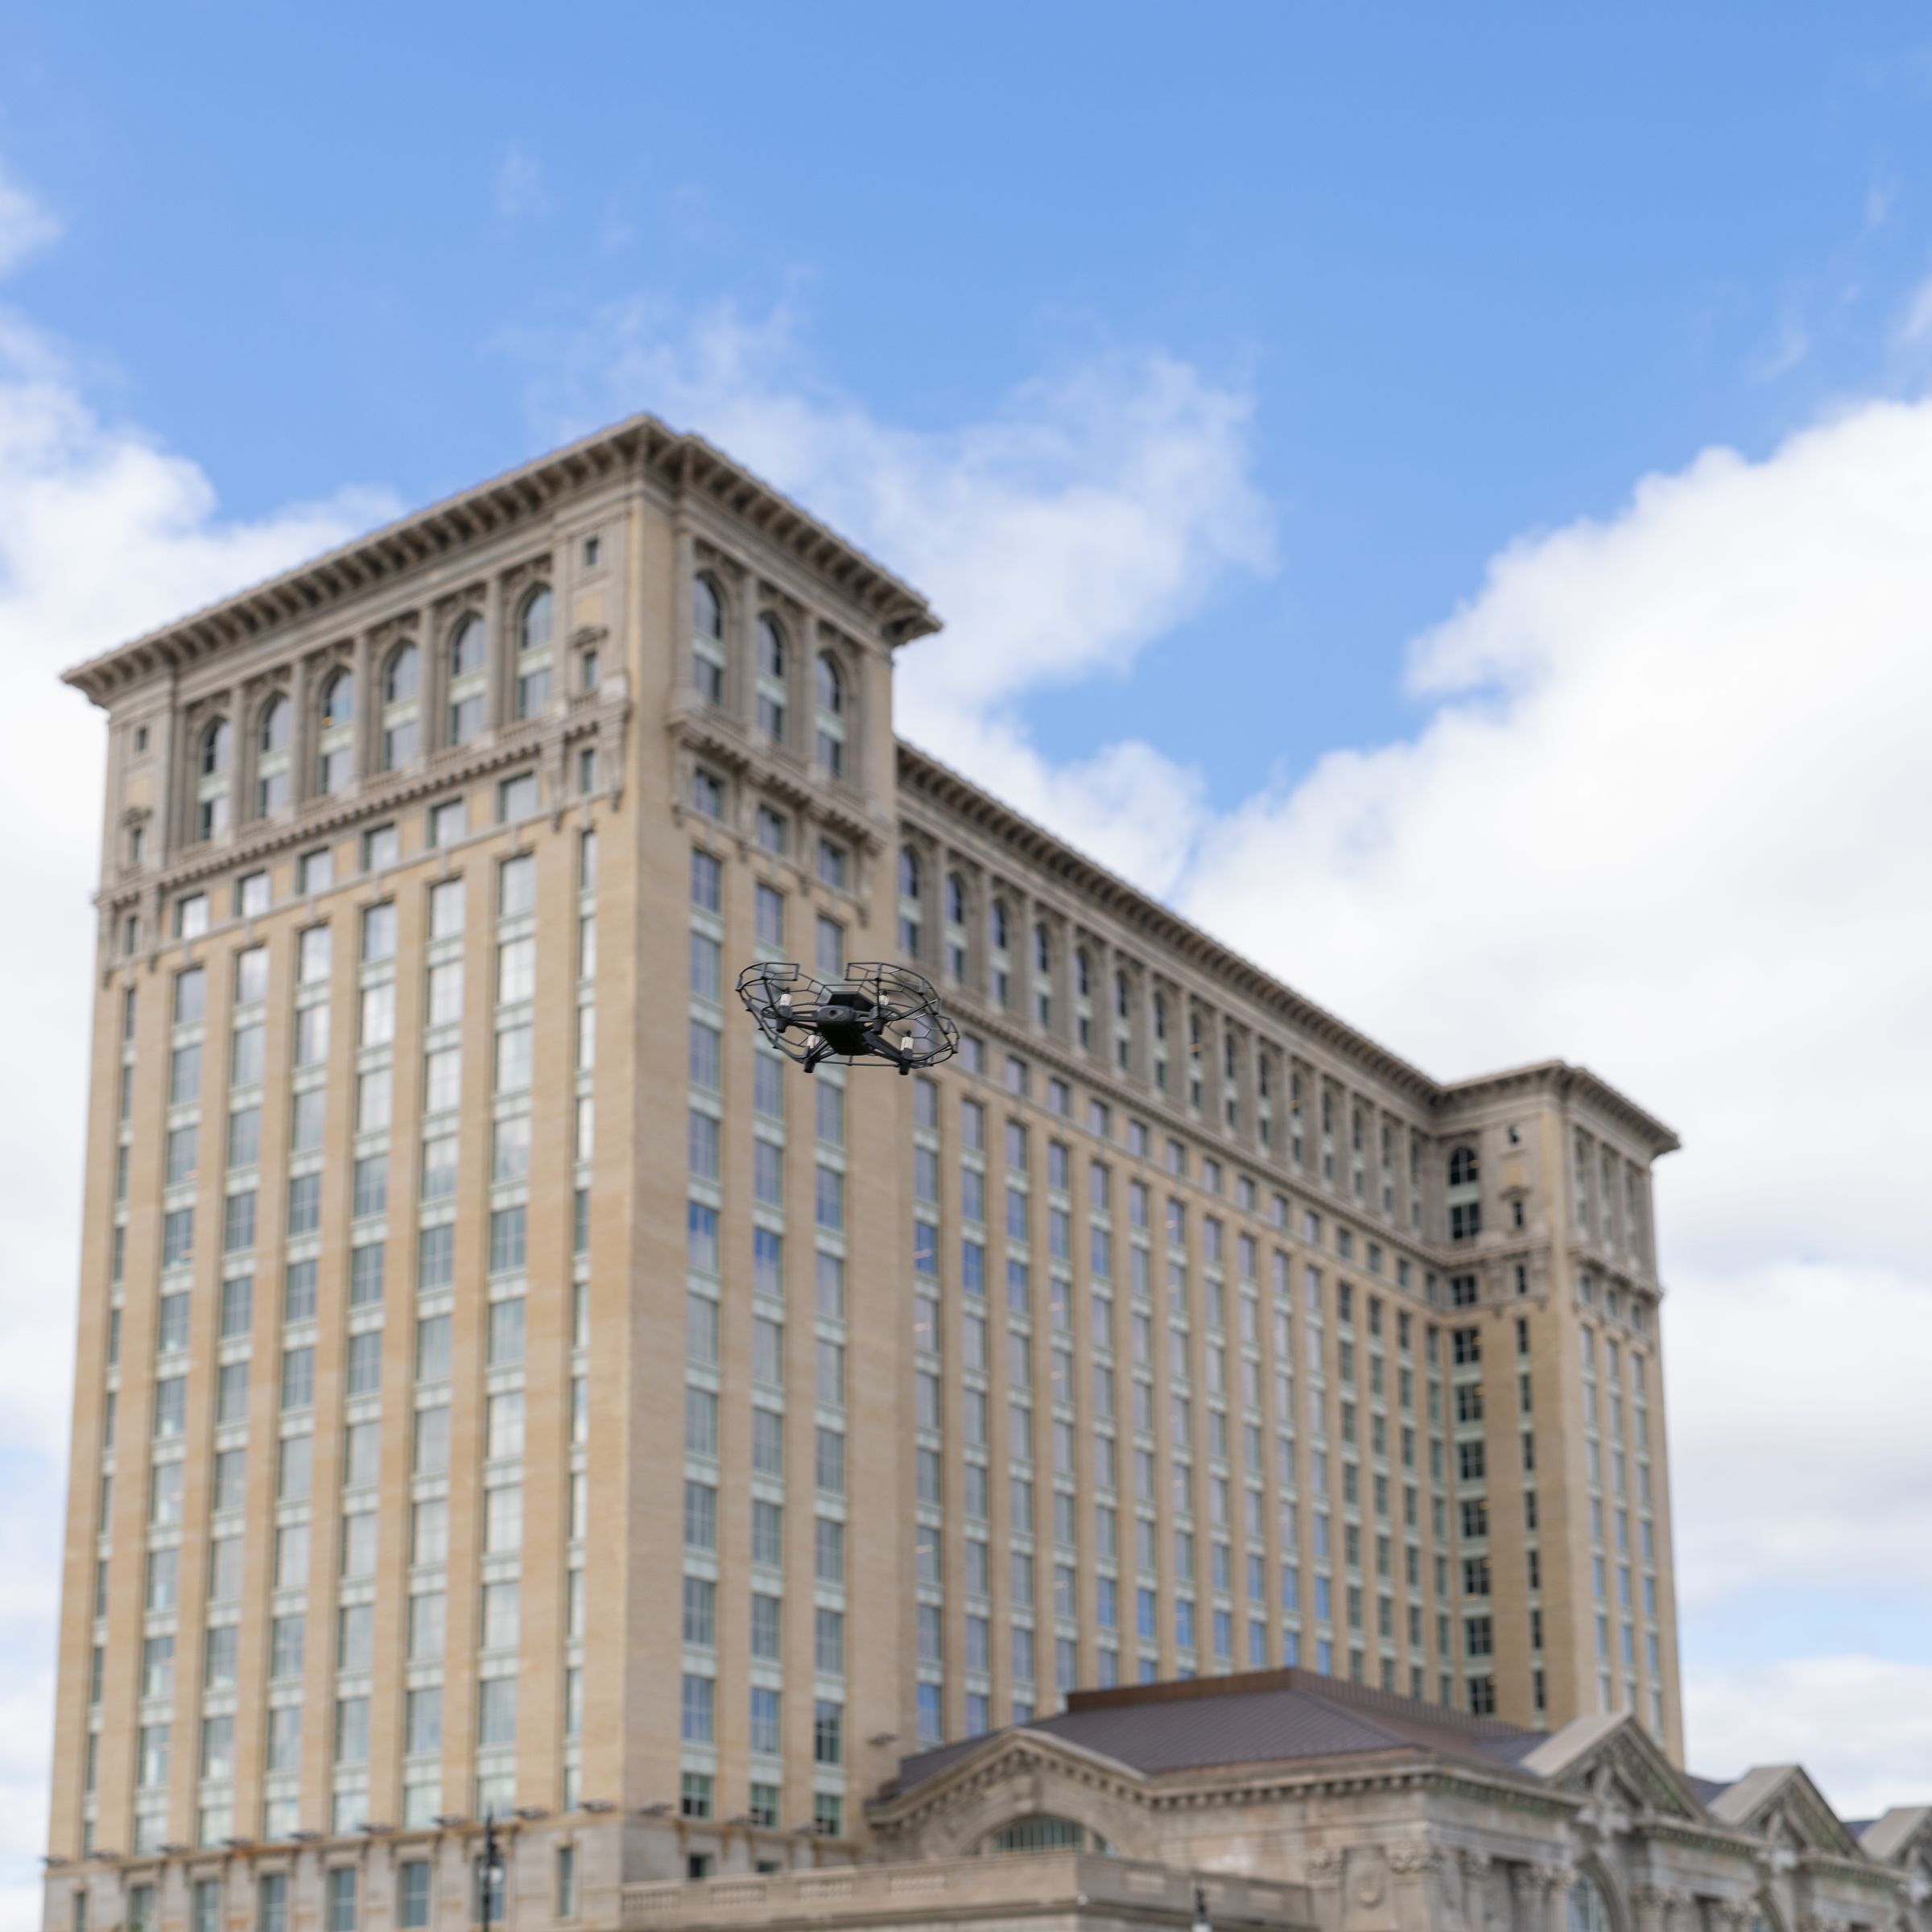 A drone flying next to Michigan Central train station in Detroit